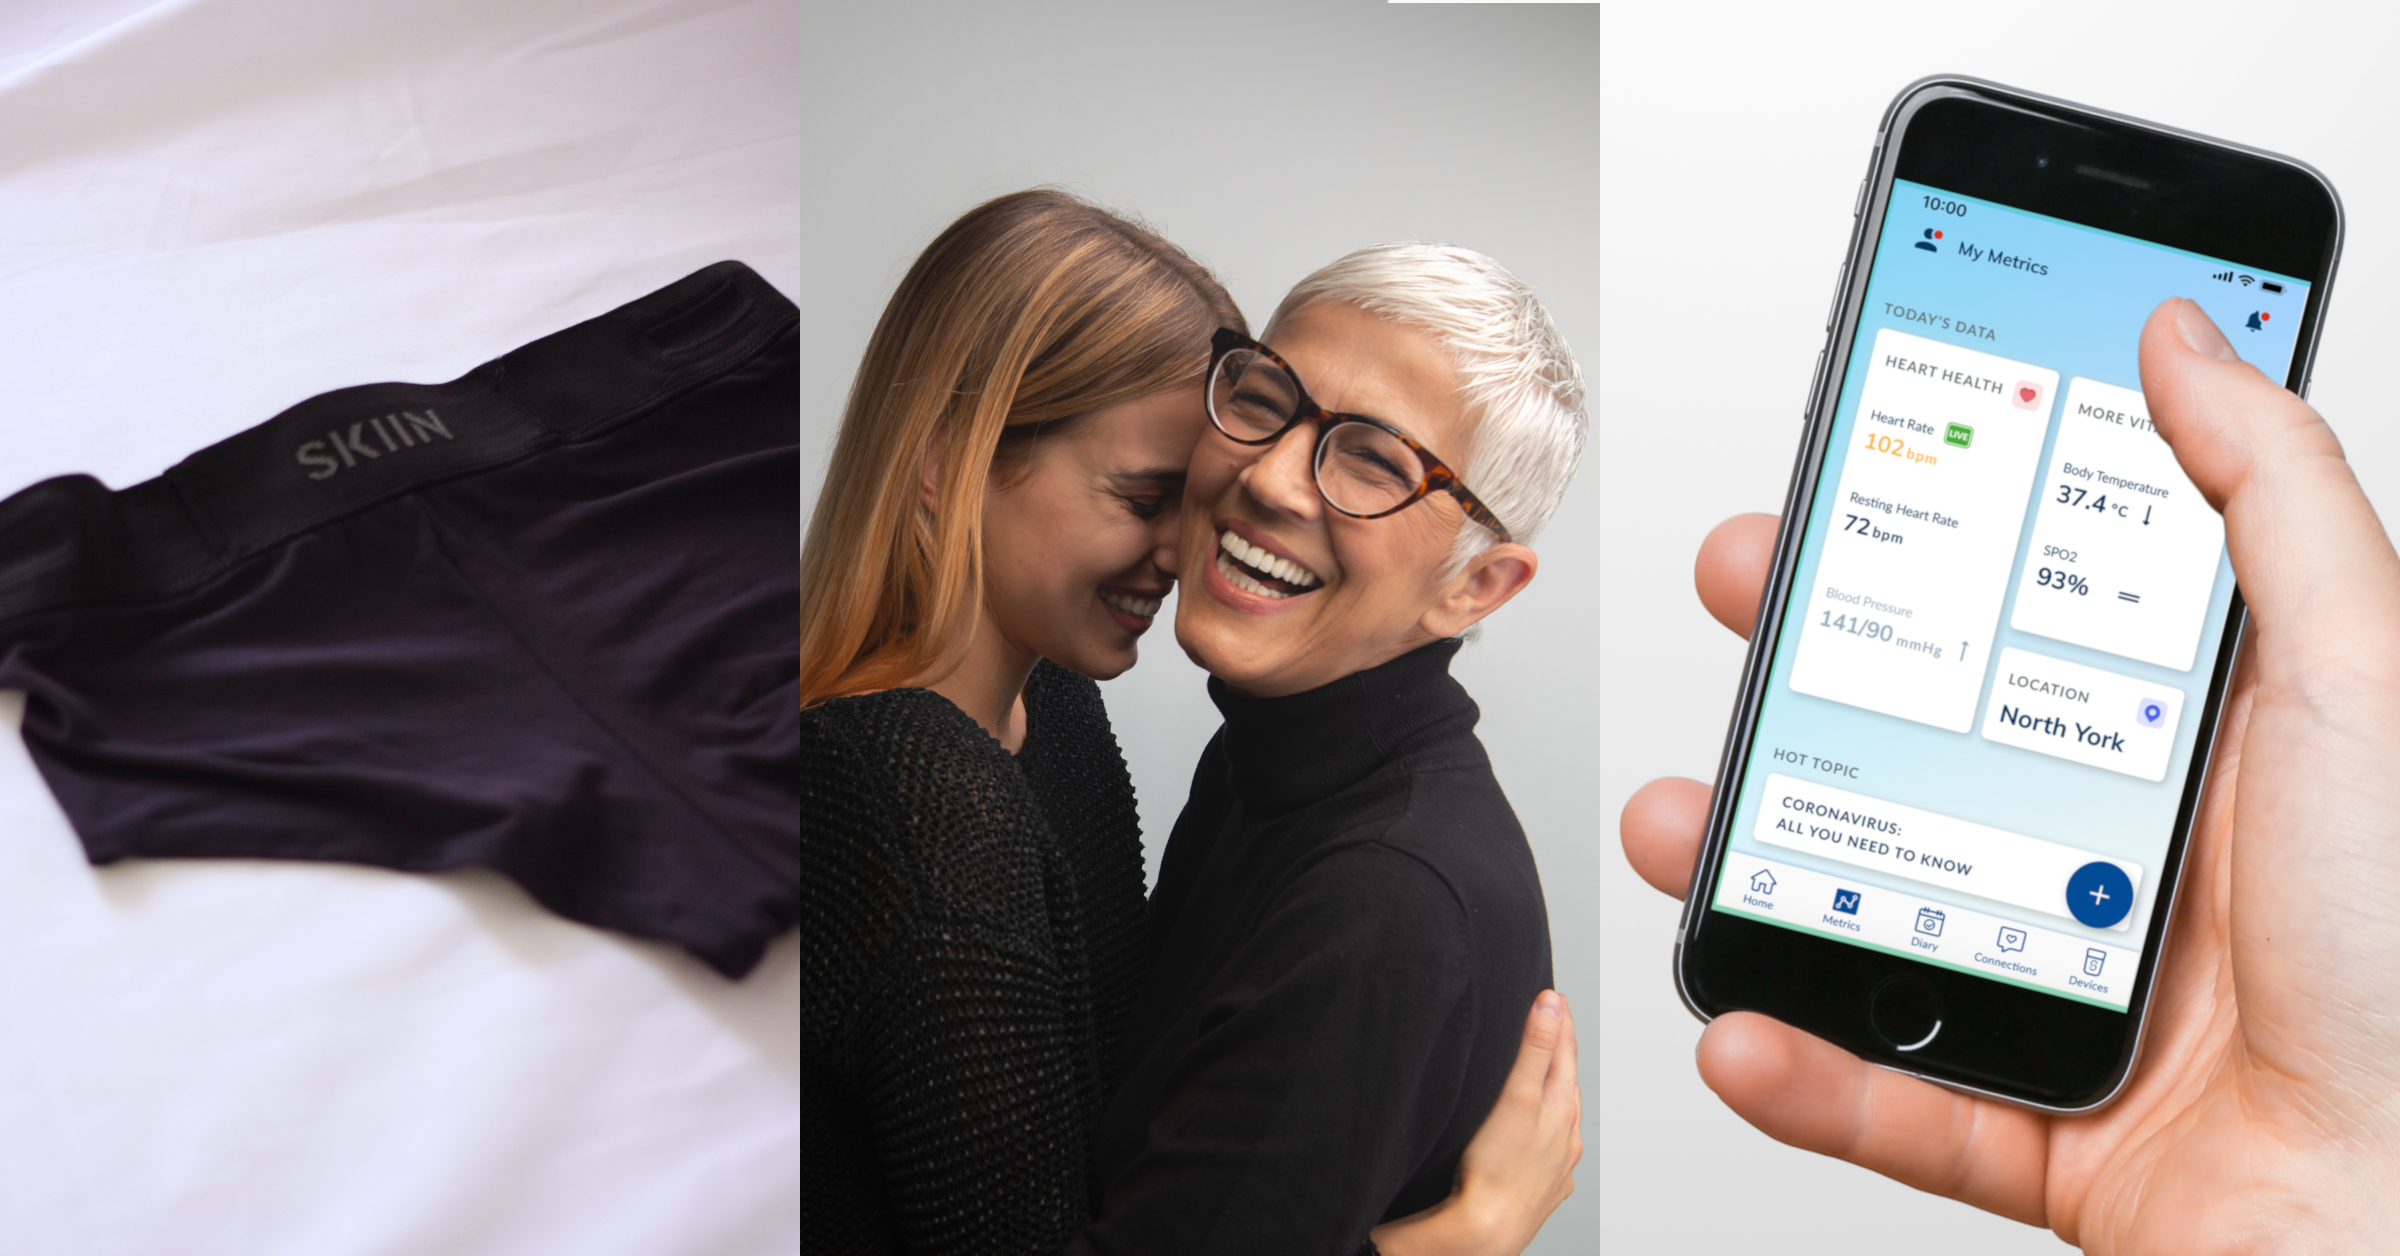 Left: A pair of Skiin underwear. Middle: A woman in her 30s embraces her mother. Right: A hand holding a smartphone with the Skiin Connected Life app.